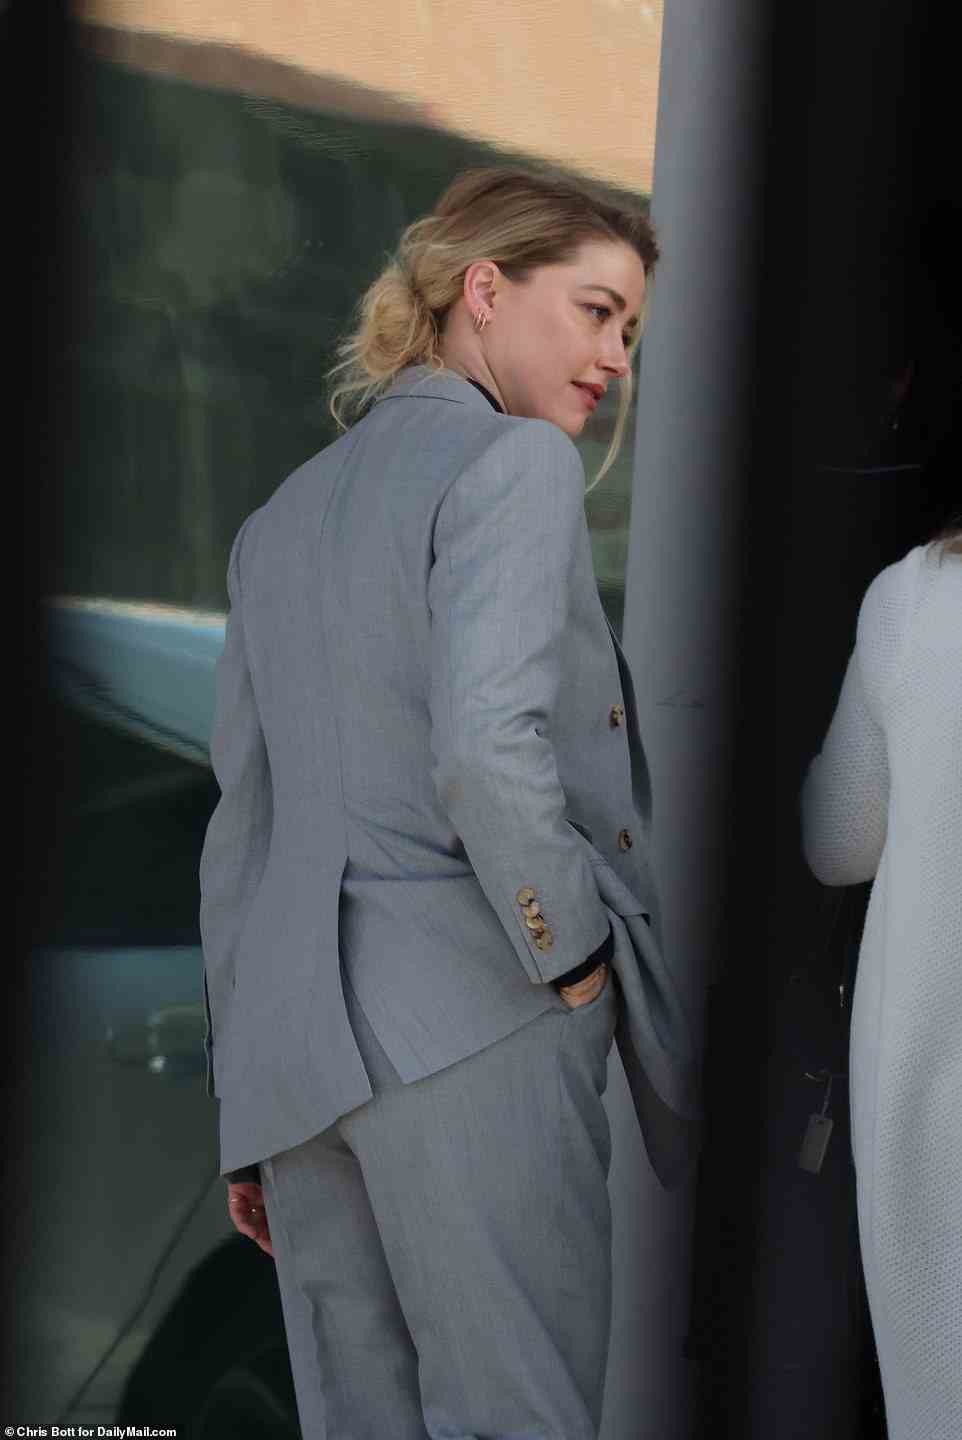 Amber Heard wore a gray suit and black top in court and appeared tense as she entered the courthouse Tuesday